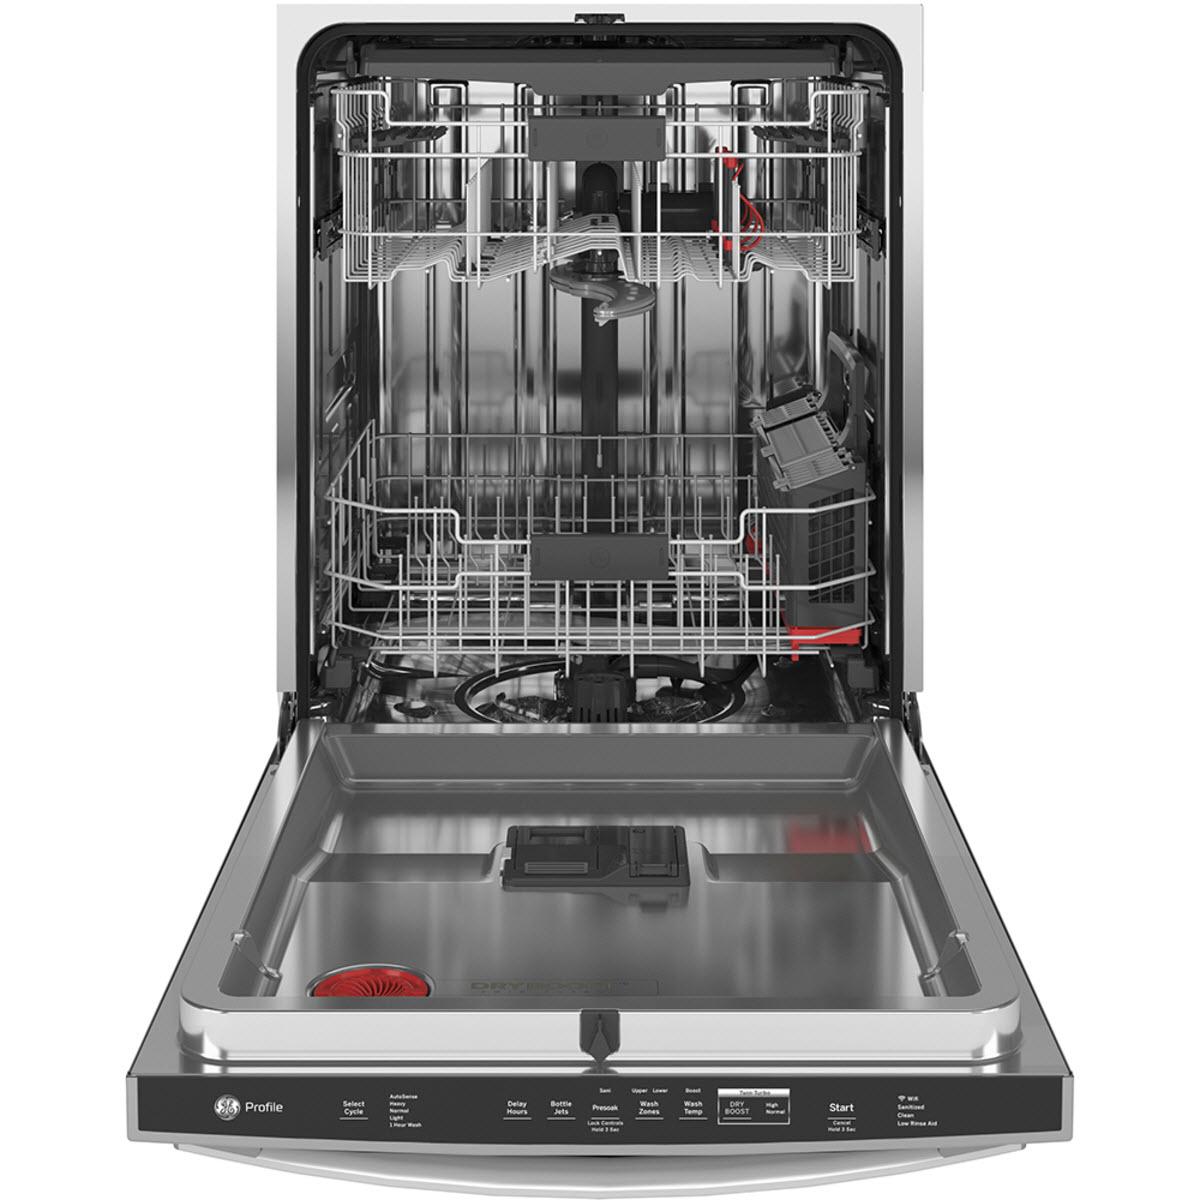 GE Profile 24-inch Built-In Dishwasher PDT785SYNFS